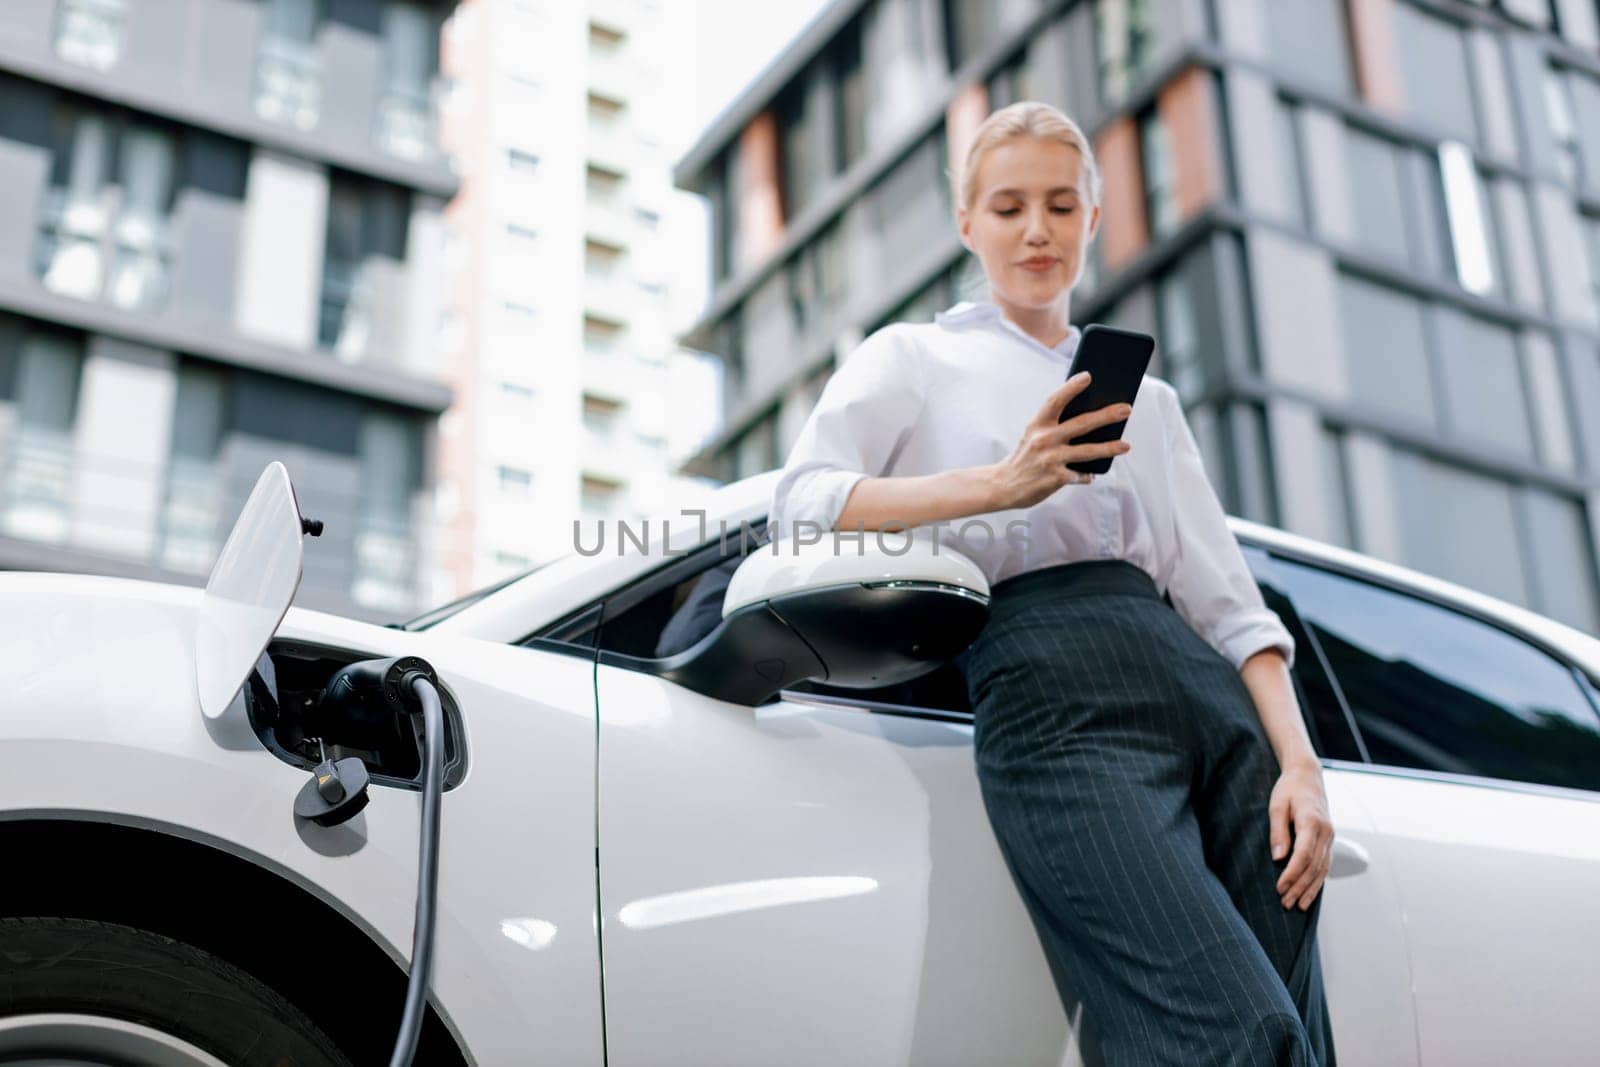 Closeup progressive businesswoman talking on smartphone, leaning electric car at charging station with residential condo apartment in background. Eco friendly rechargeable EV car concept.